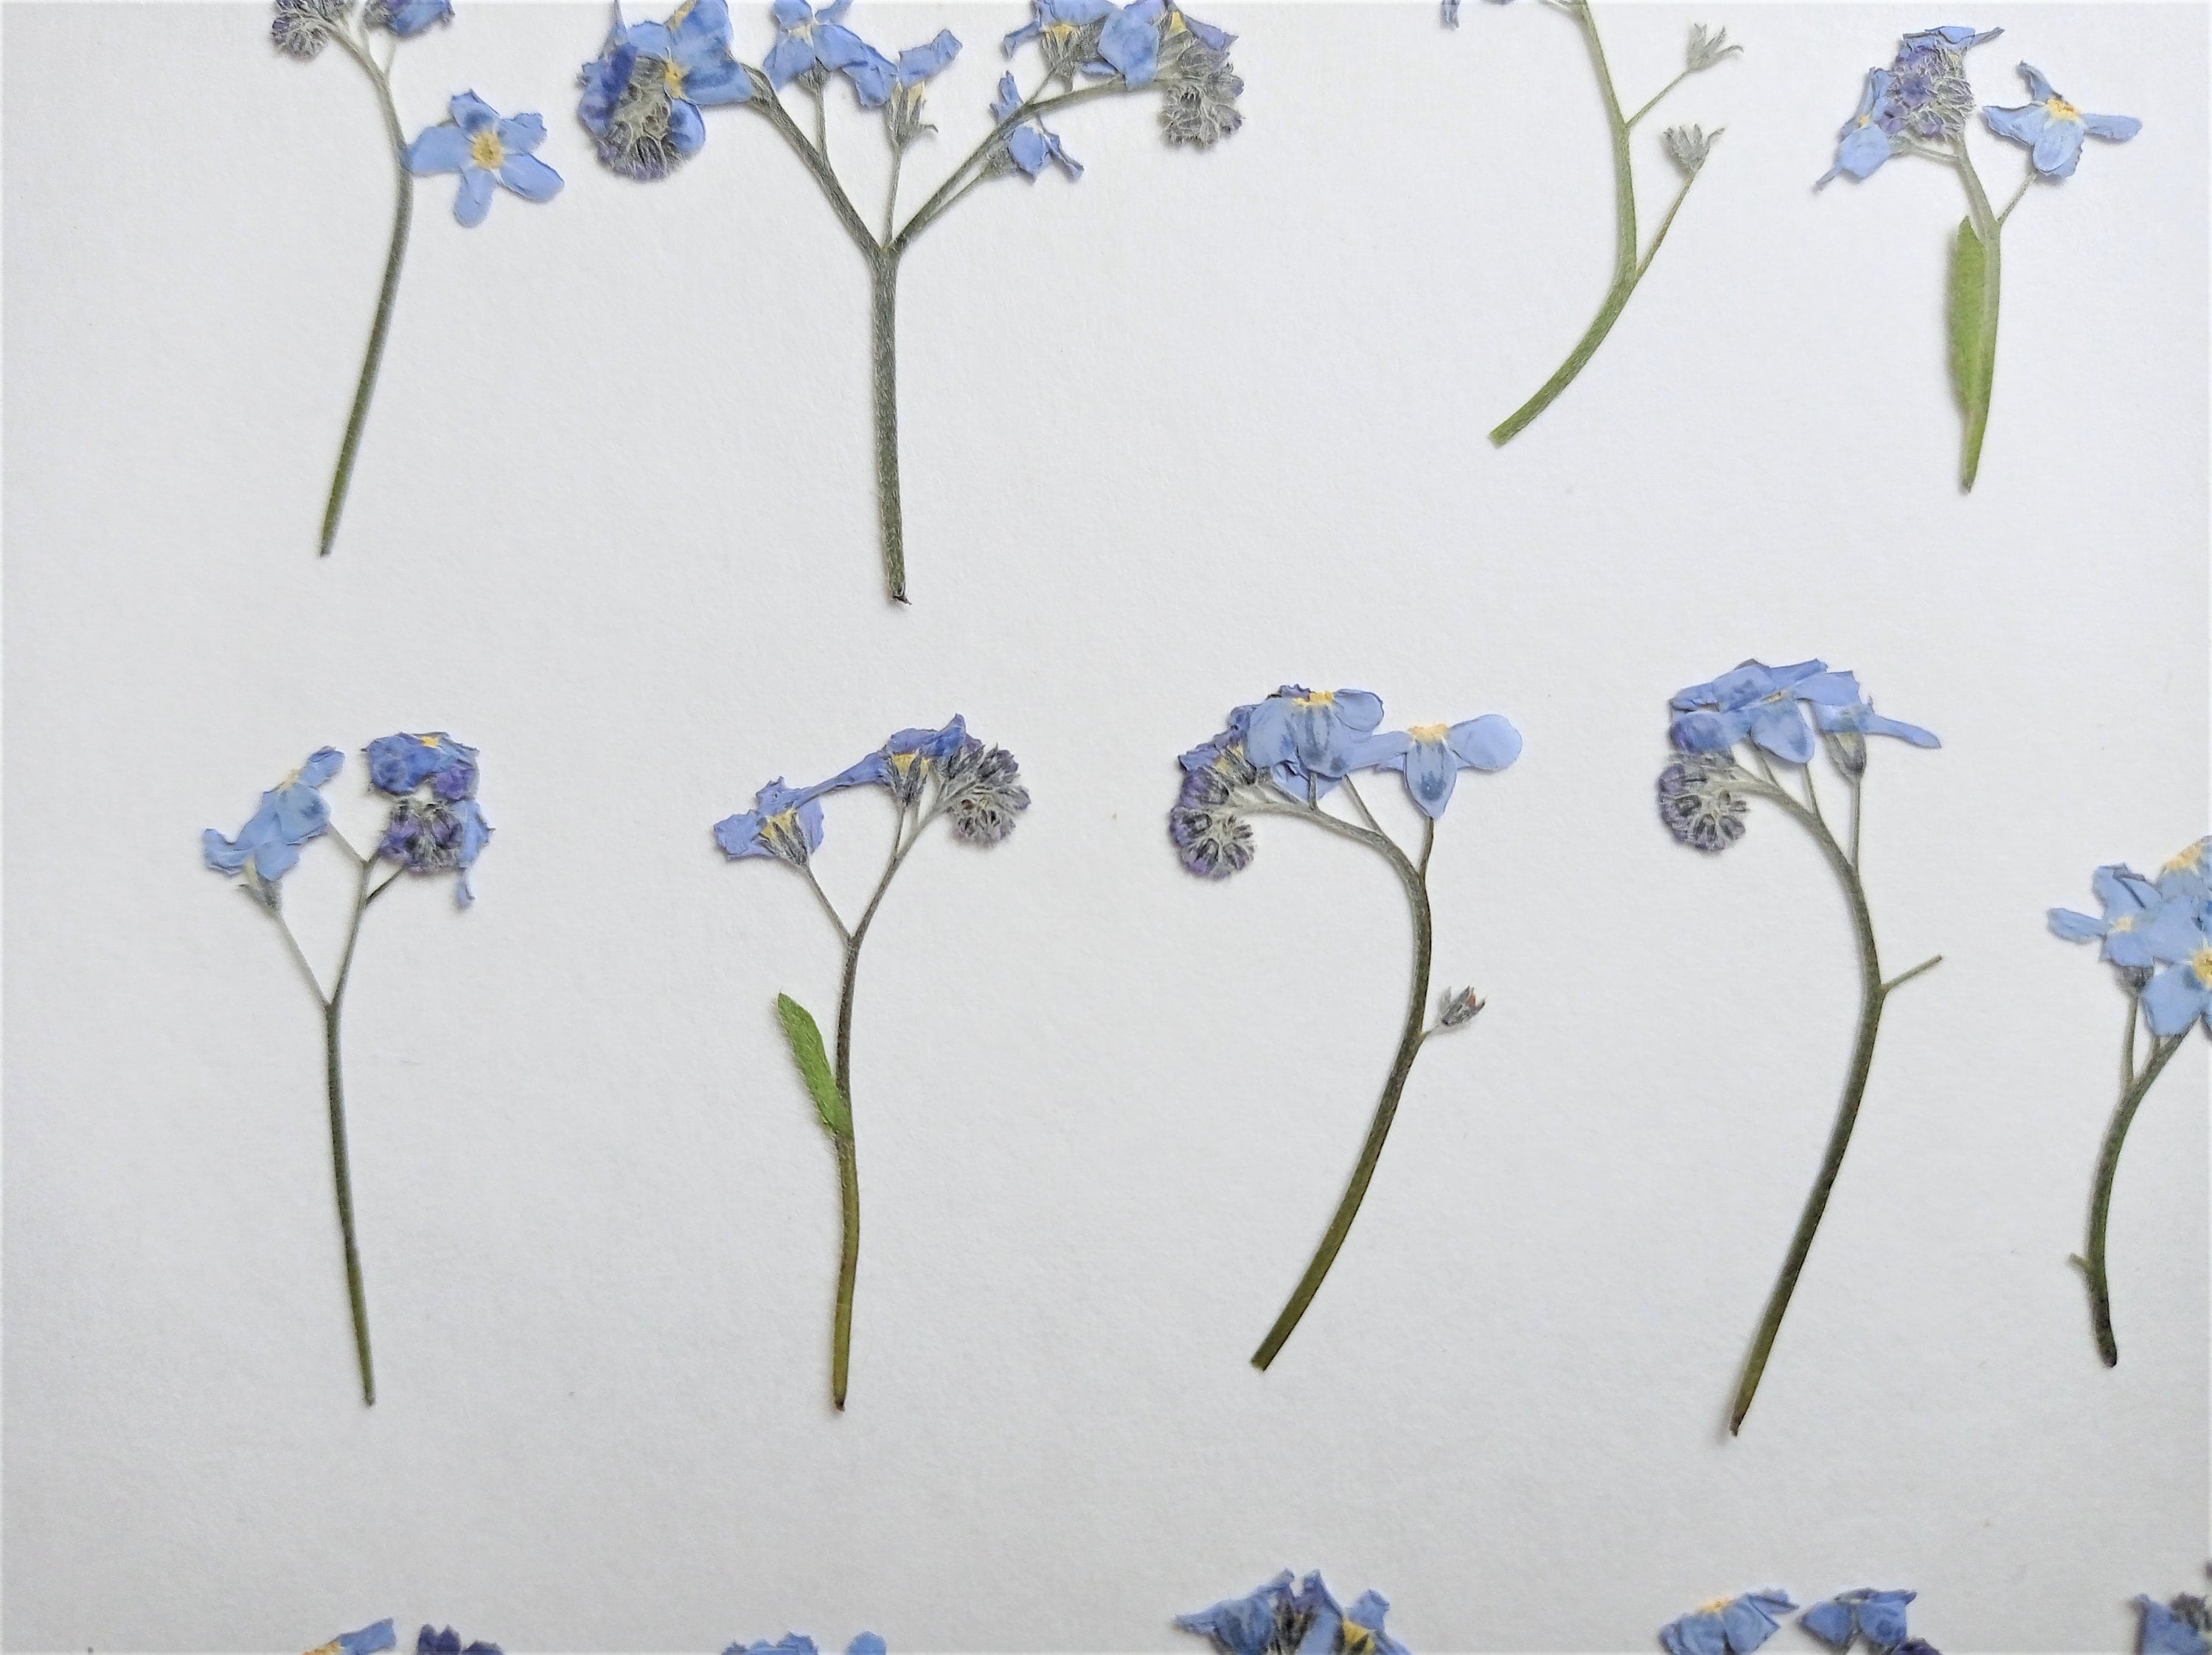 50 Pcs Natural Forget Me Not Pressed Dried Flowers Blue DonT Forget Me  Dried Fl